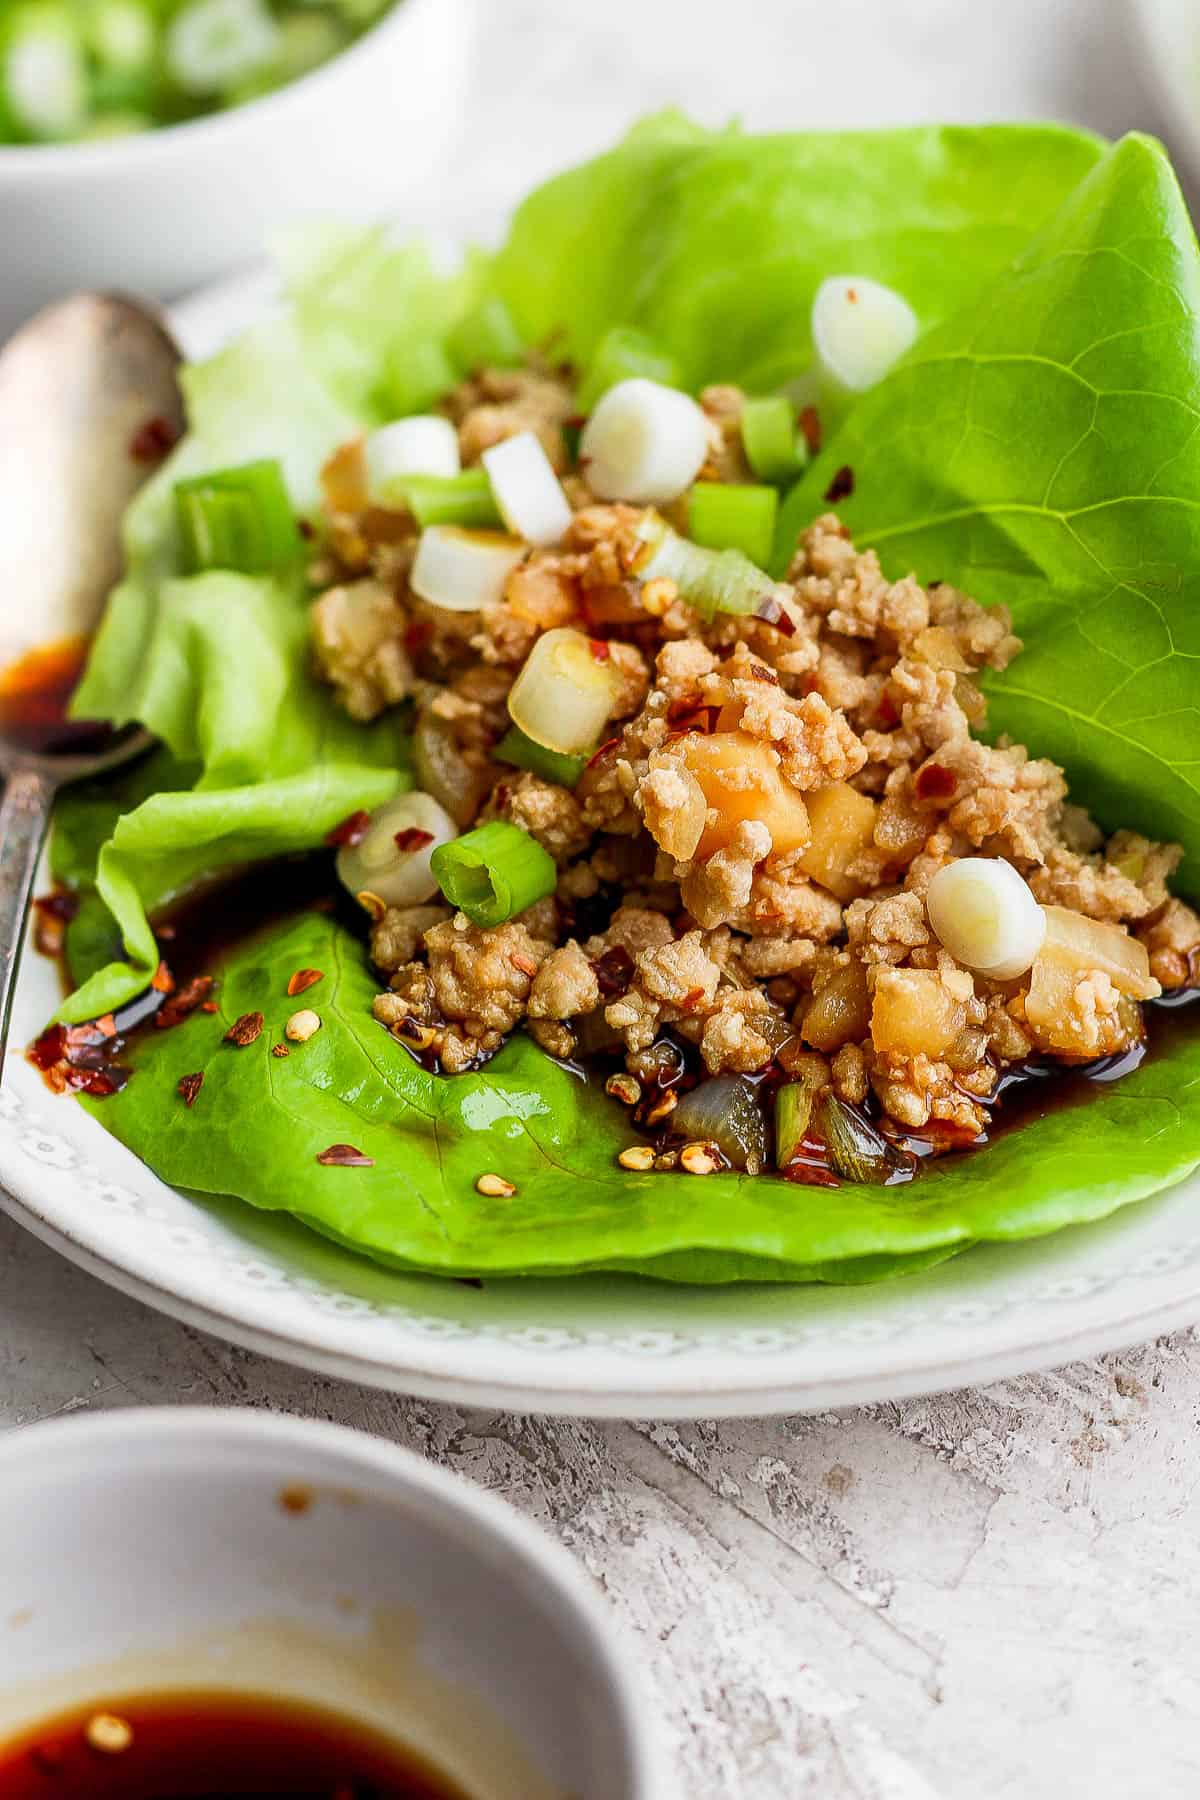 A chicken lettuce wrap on a plate.